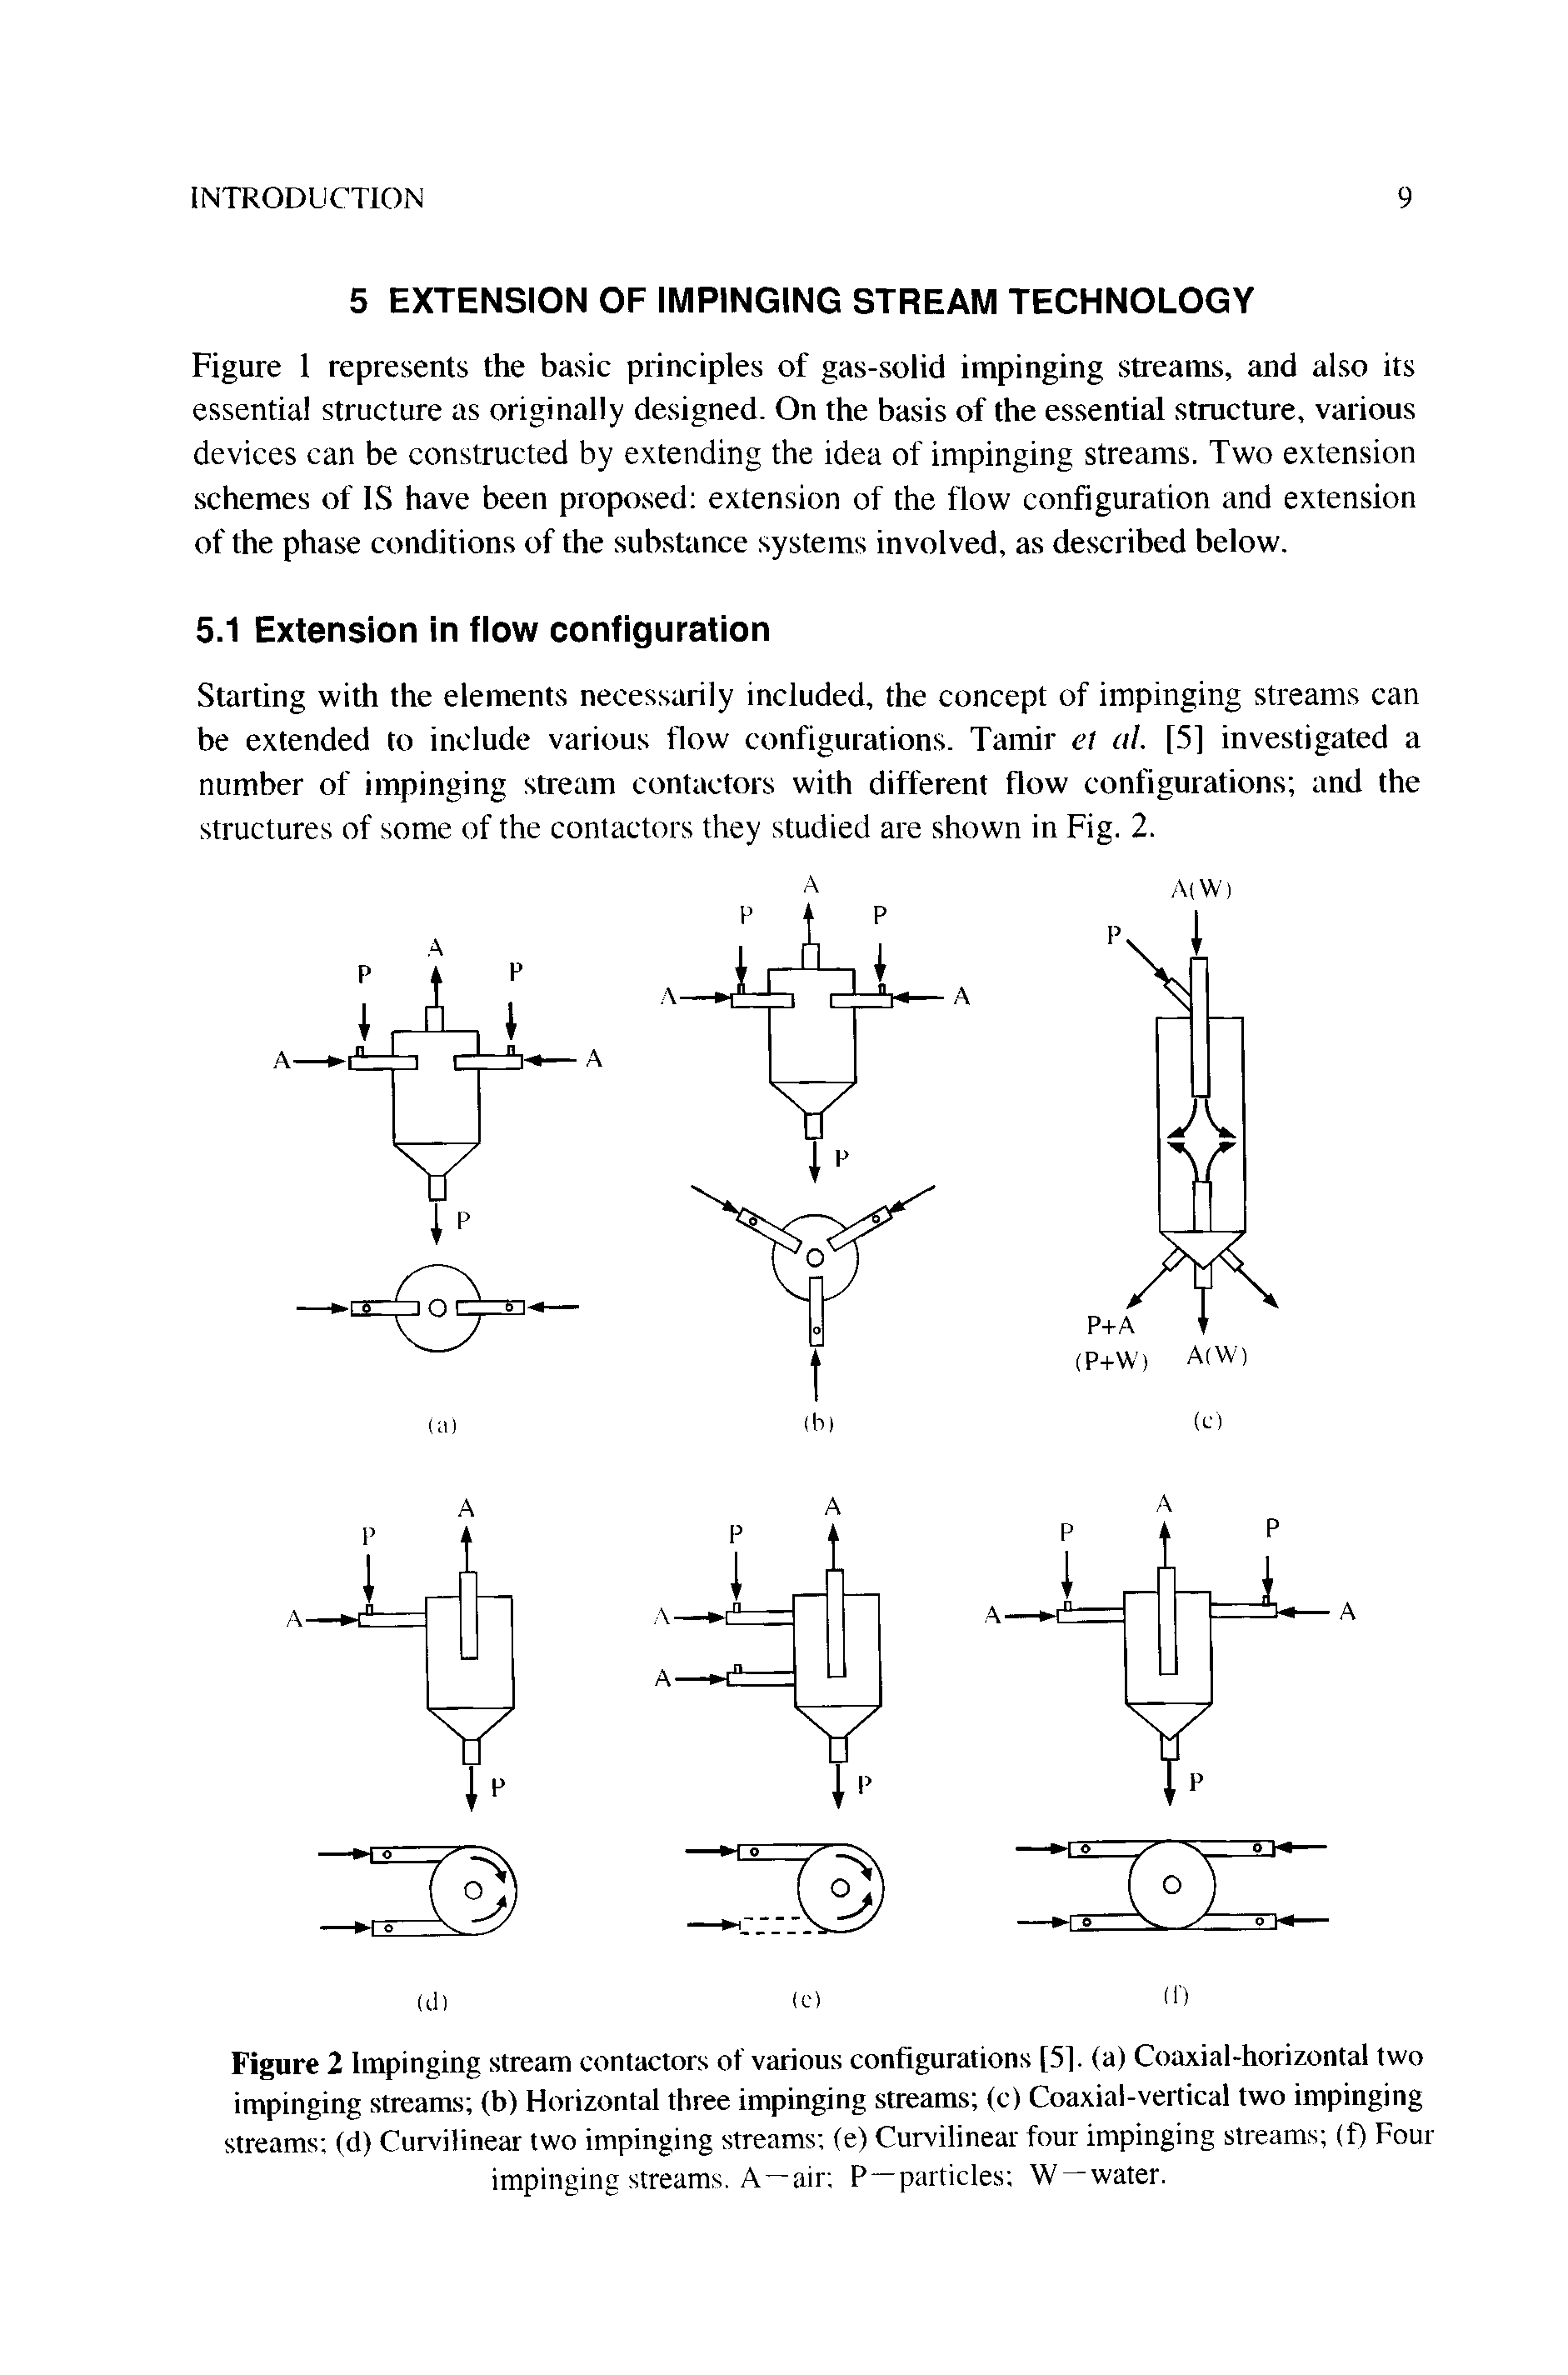 Figure 2 Impinging stream contactors of various configurations [51. (a) Coaxial-horizontal two impinging streams (b) Horizontal three impinging streams (c) Coaxial-vertical two impinging streams (d) Curvilinear two impinging streams (e) Curvilinear four impinging streams (f) Four impinging streams. A—air P-—particles W water.